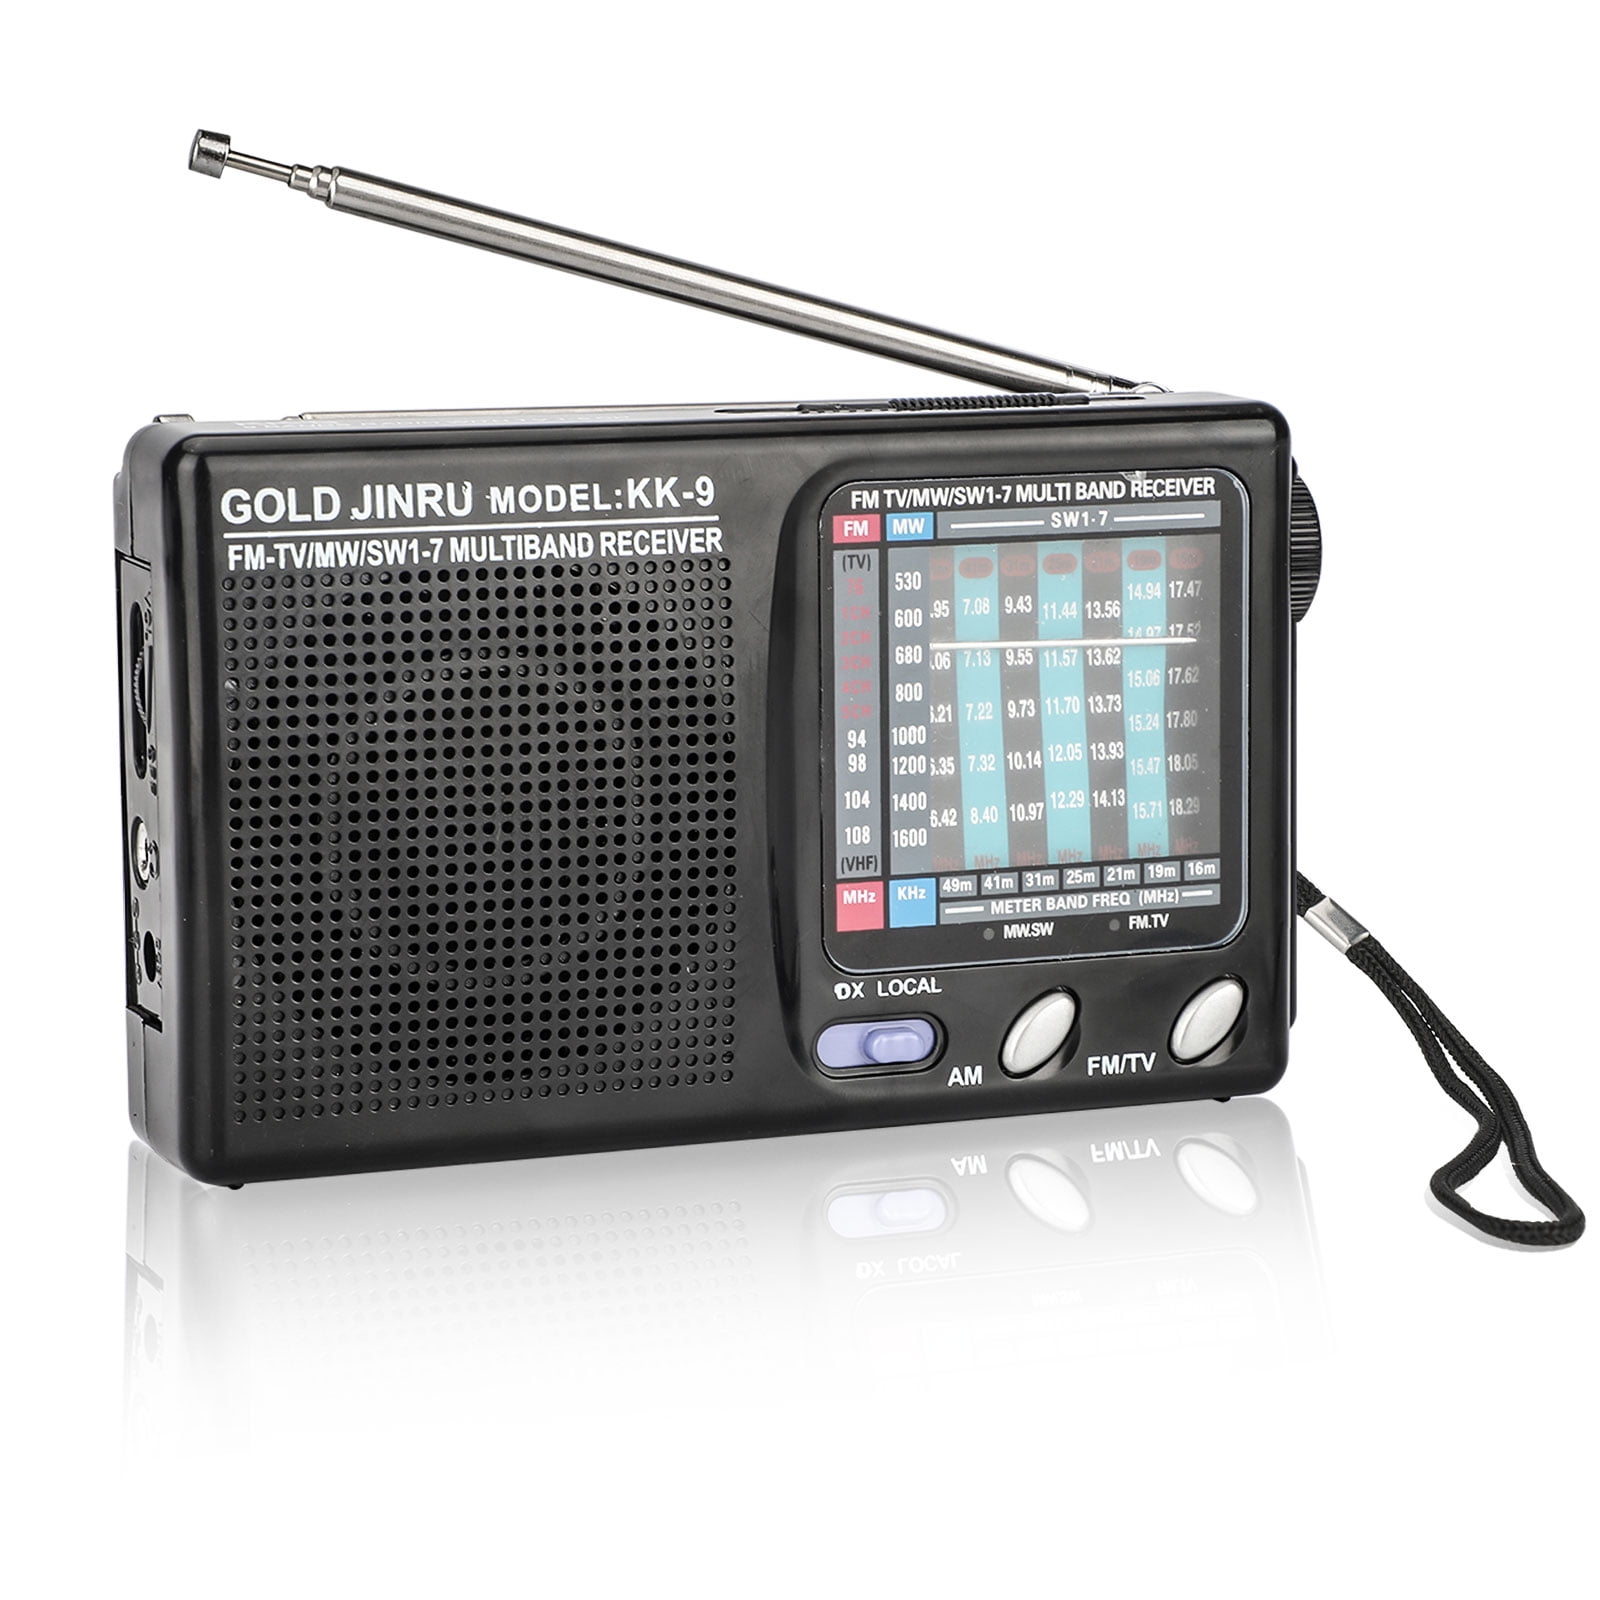 Am // Fm Portable Pocket Radio With Best Reception Small Battery Operated Pers 